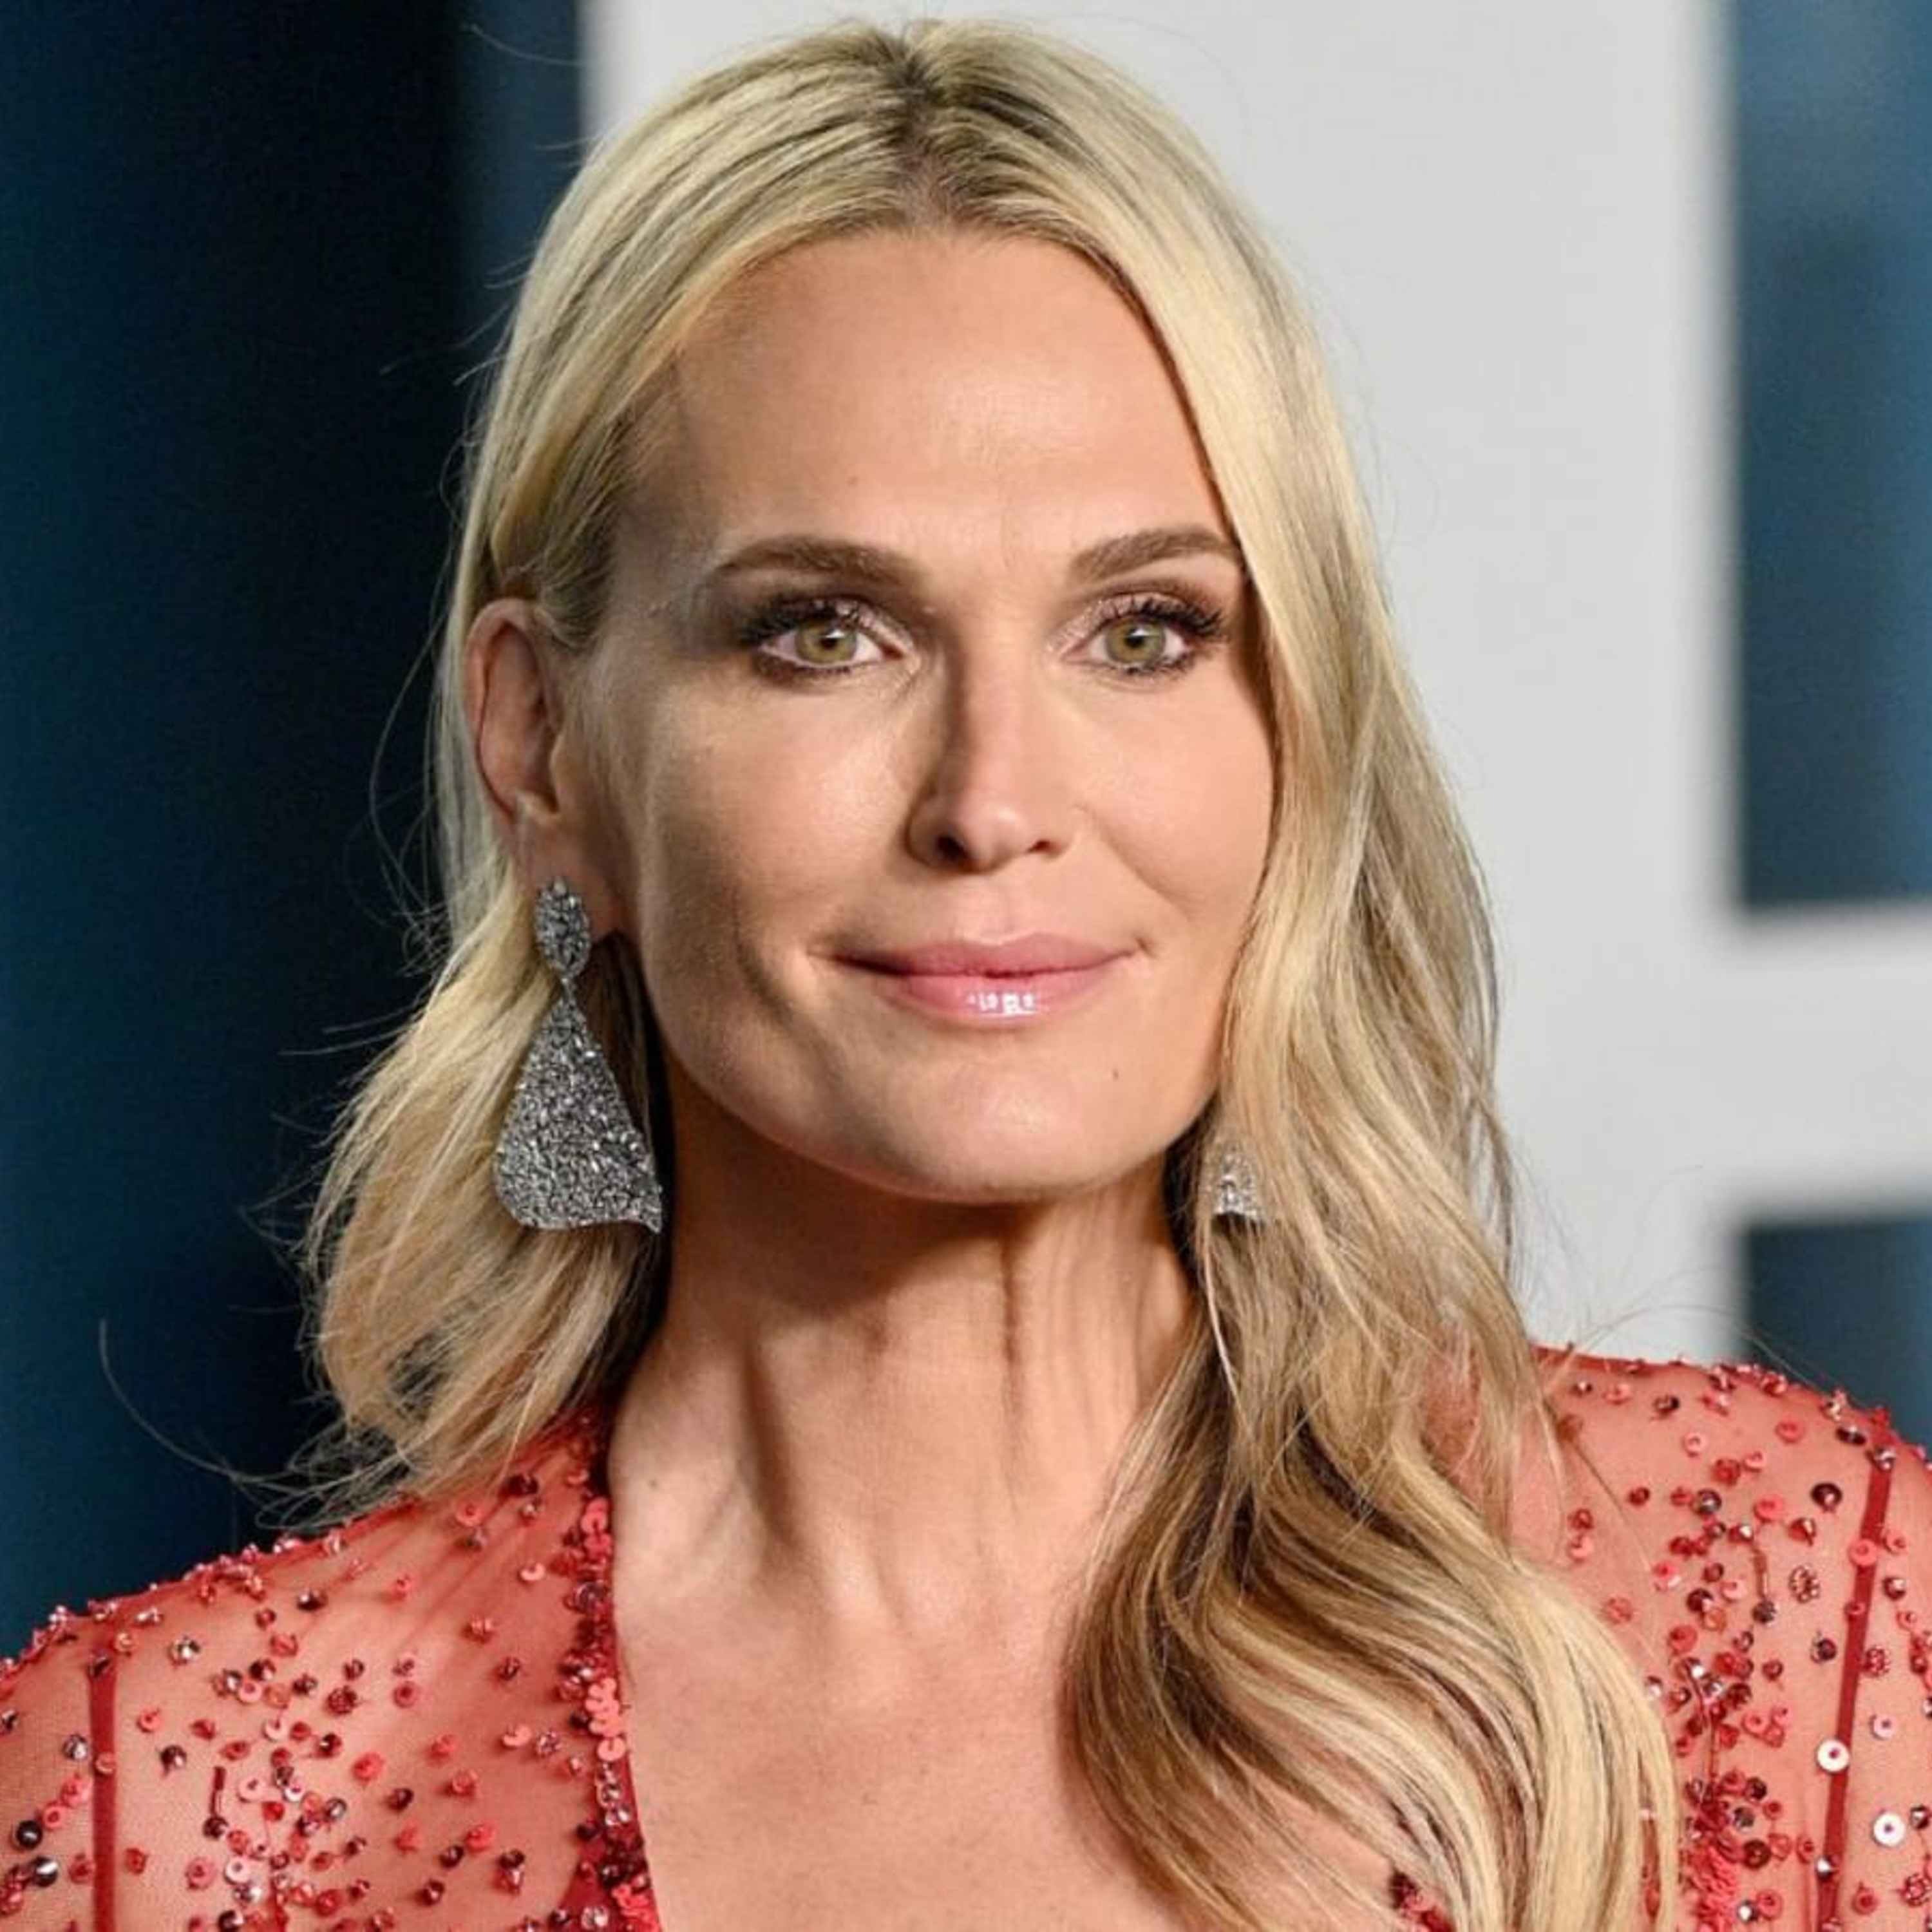 Molly Sims Shares Her YSE Beauty